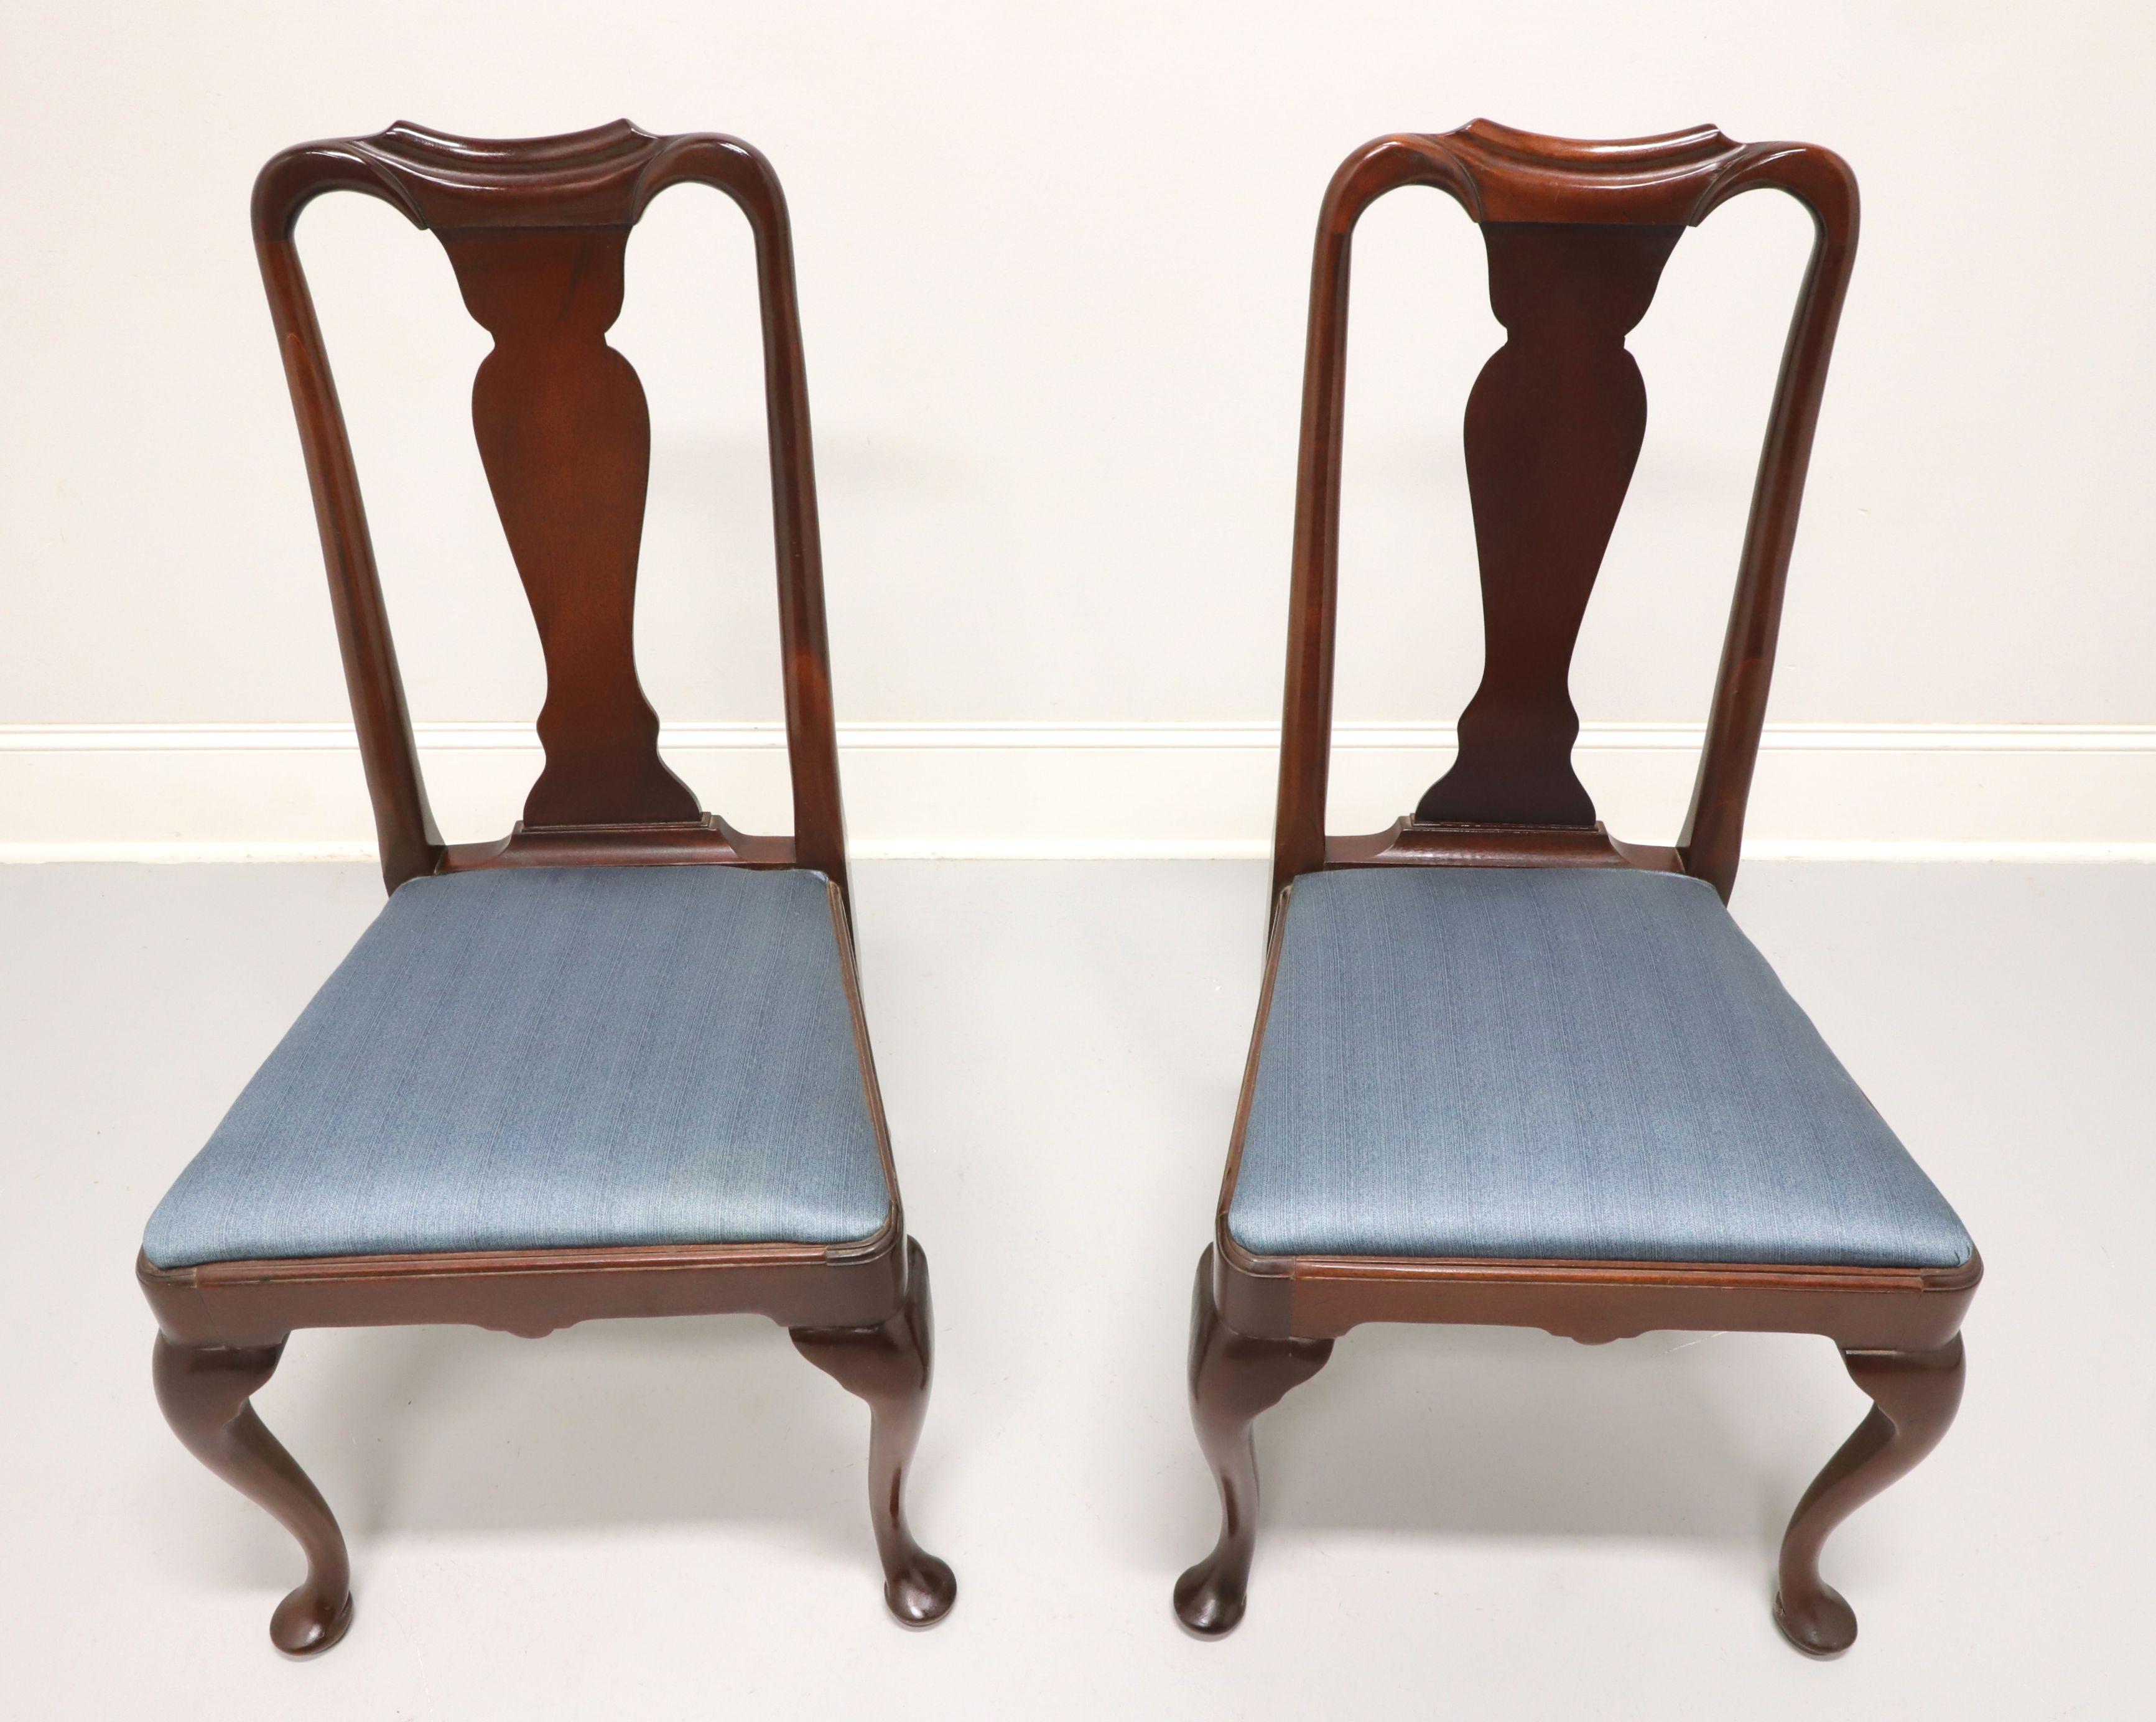 A pair of dining side chairs in the Queen Anne style by Hickory Chair. Solid mahogany with solid carved back, a blue color fabric upholstered seat, cabriole legs and pad feet. Made in North Carolina, USA, in the late 20th century.

Measures: